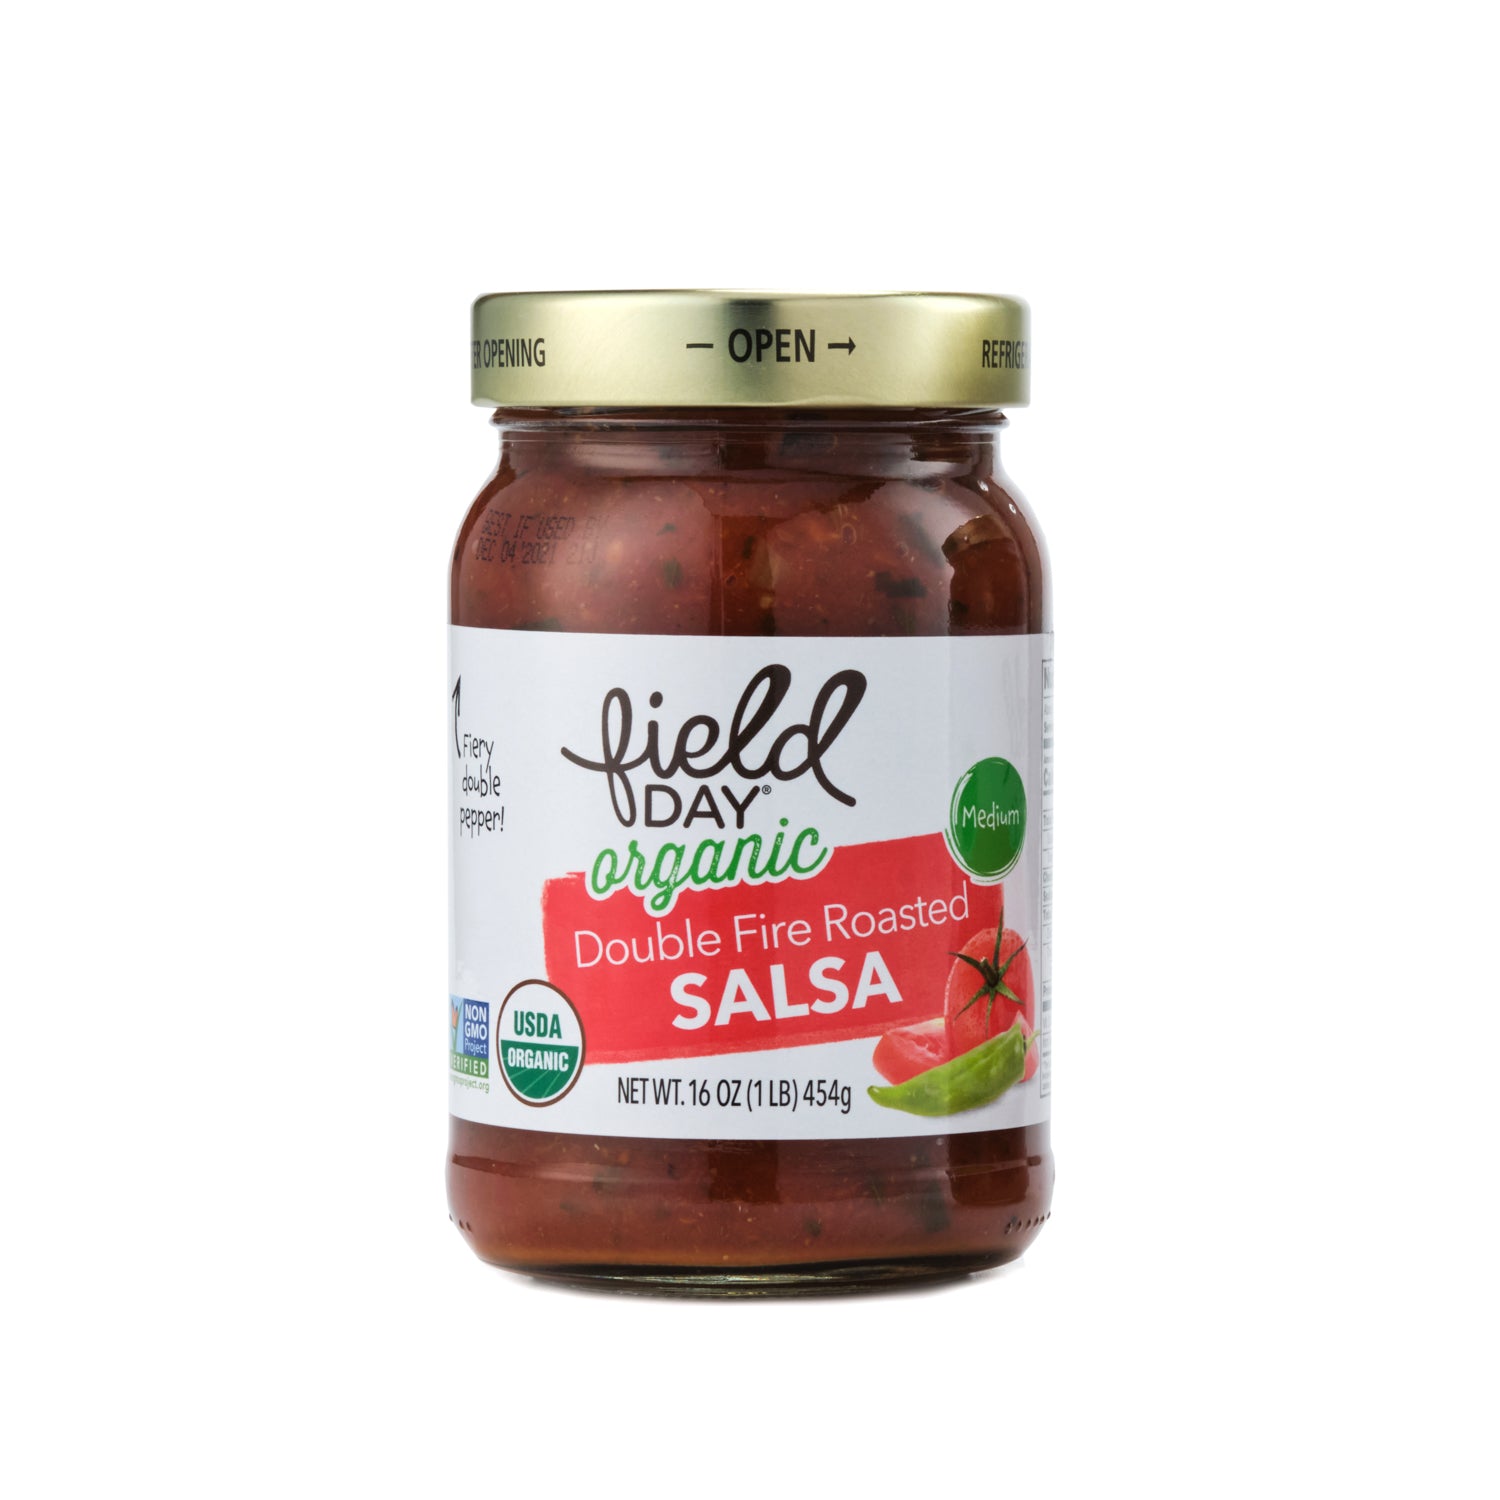 454g　Roasted　Salsa　Options　Double　Fire　Organic　Day　Field　Healthy　Medium　–